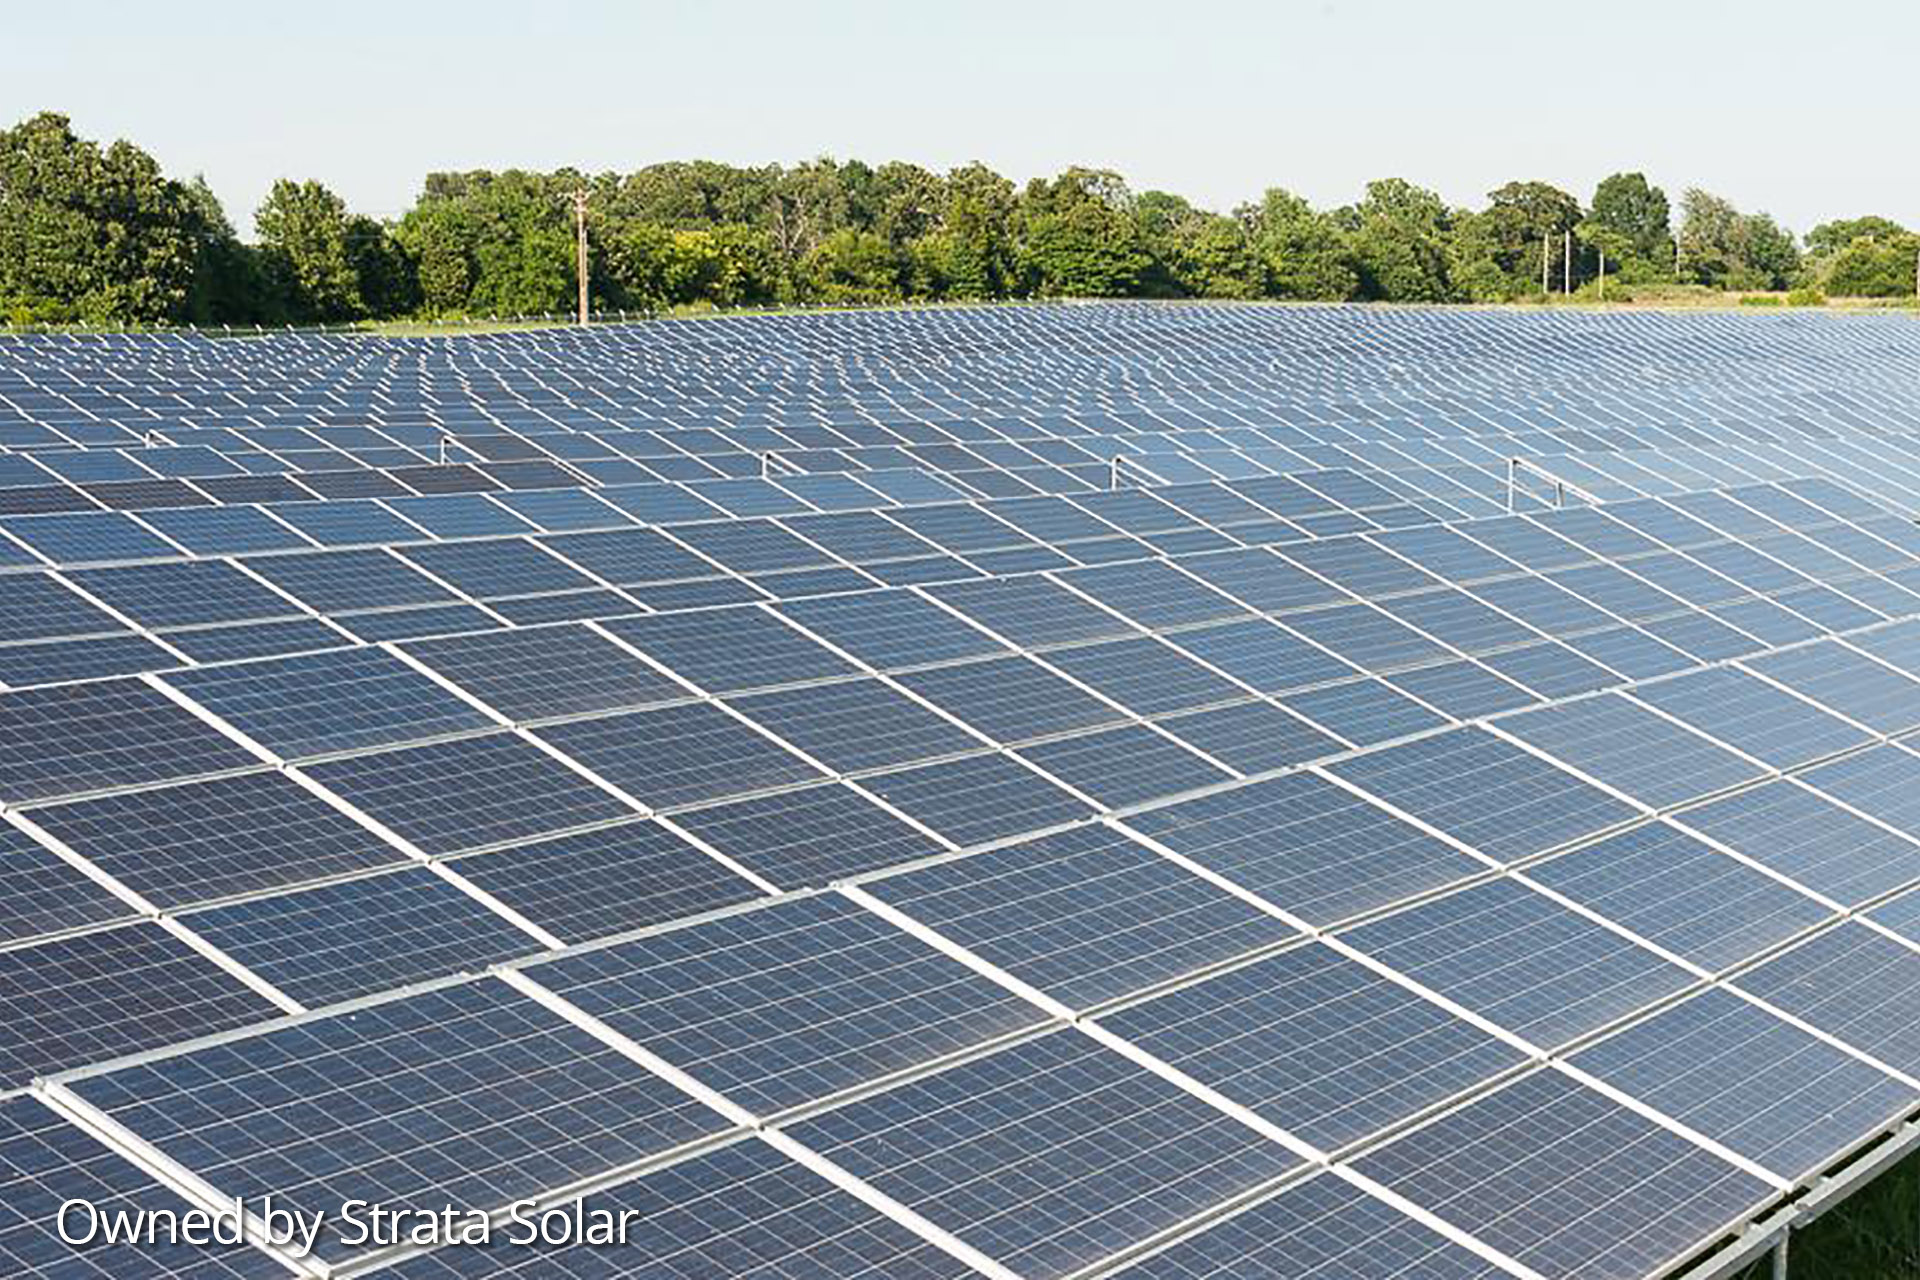 Field covered in solar panels at the Springfield solar project in Missouri.